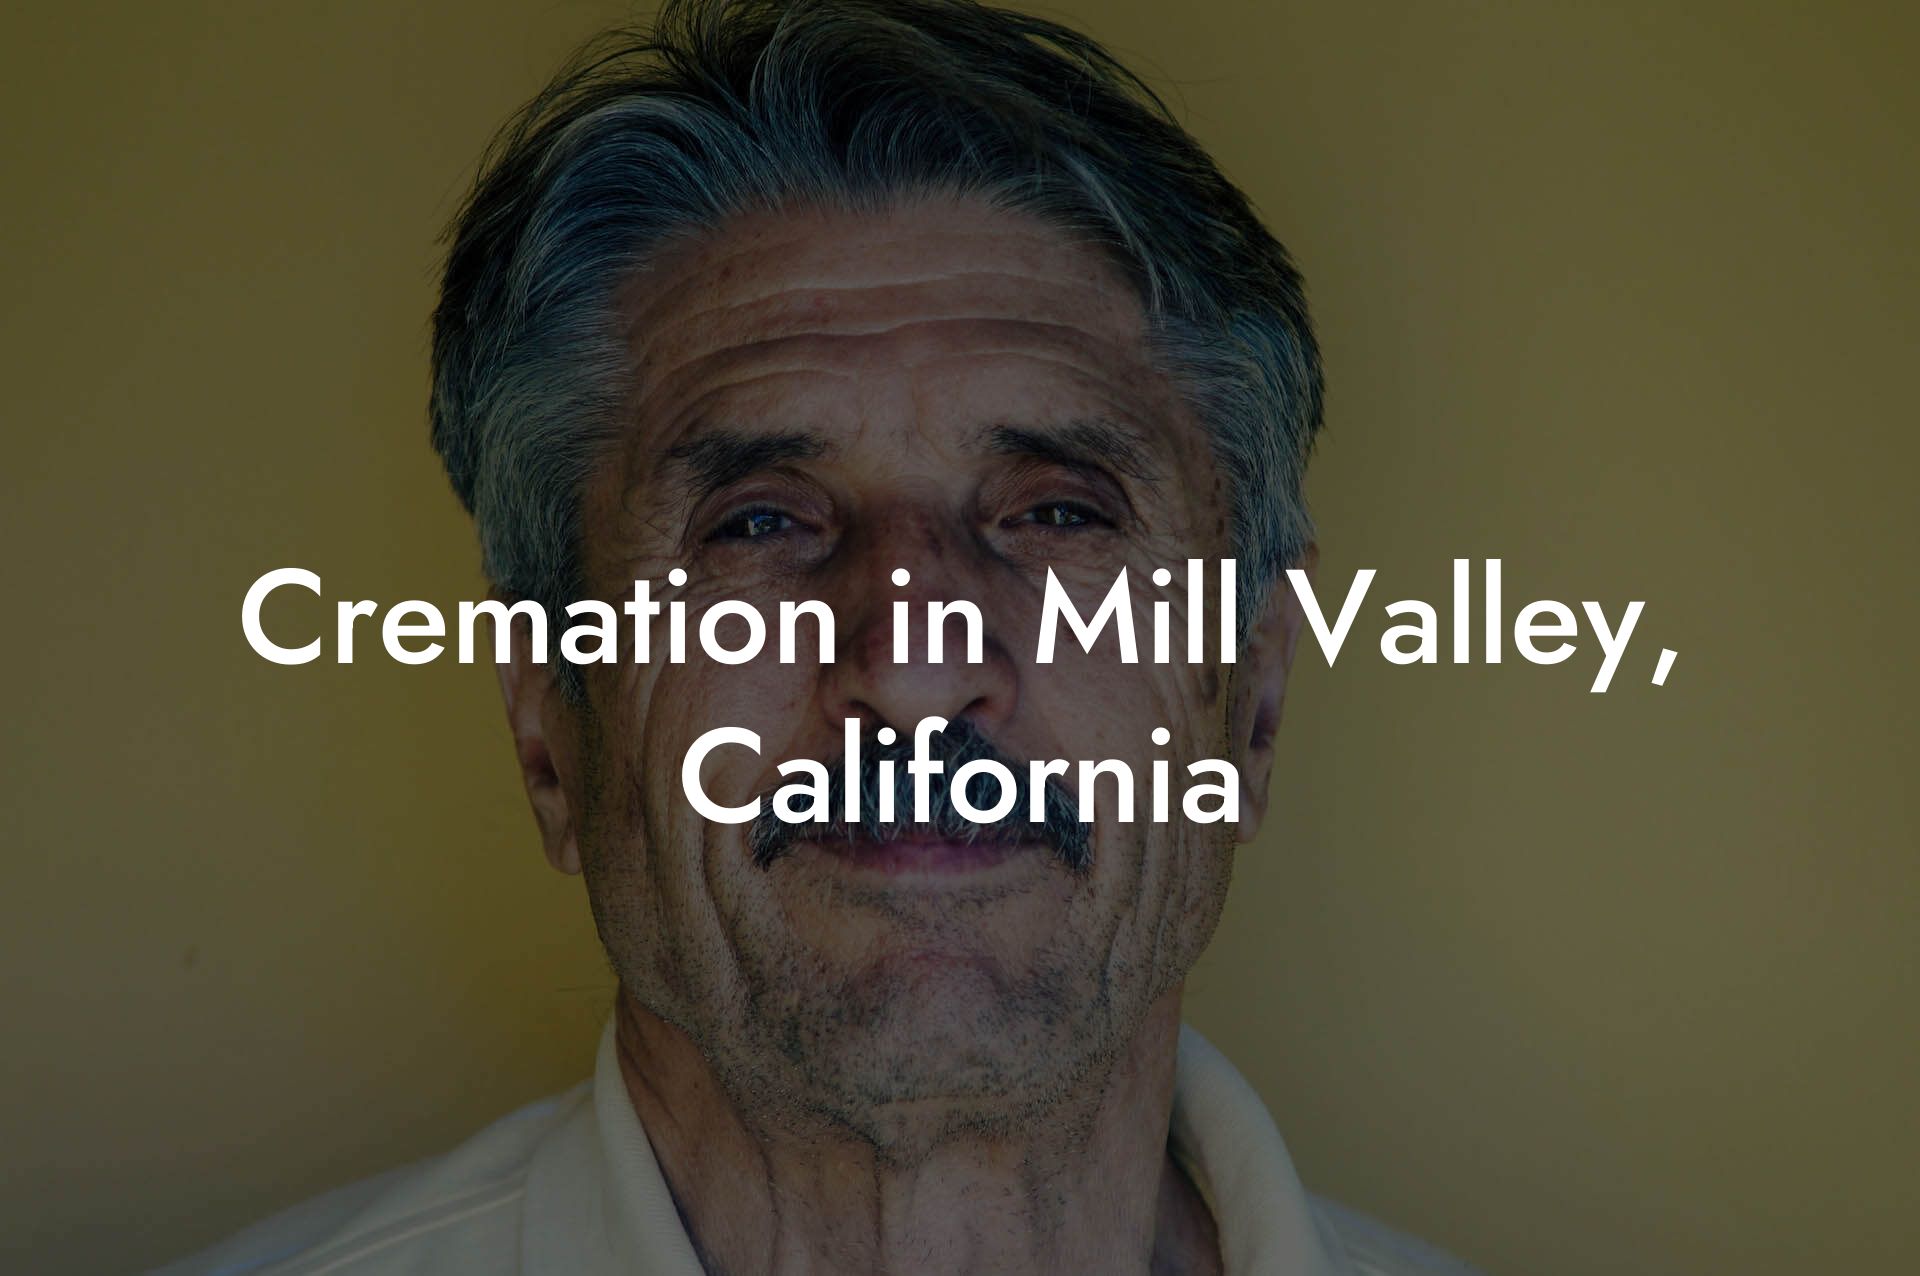 Cremation in Mill Valley, California